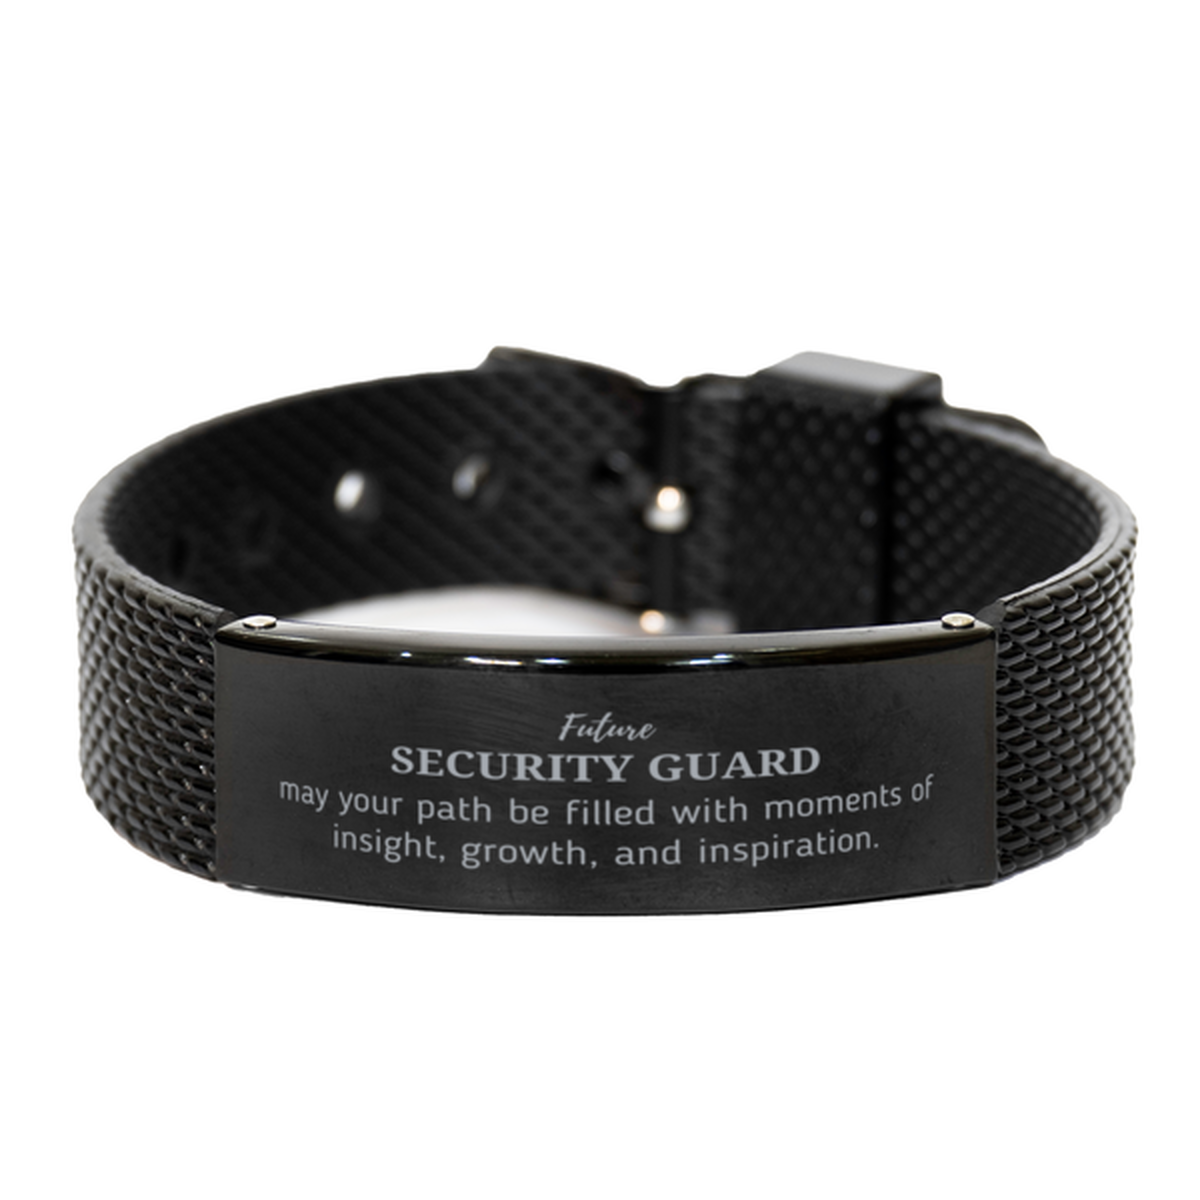 Future Security Guard Gifts, May your path be filled with moments of insight, Graduation Gifts for New Security Guard, Christmas Unique Black Shark Mesh Bracelet For Men, Women, Friends